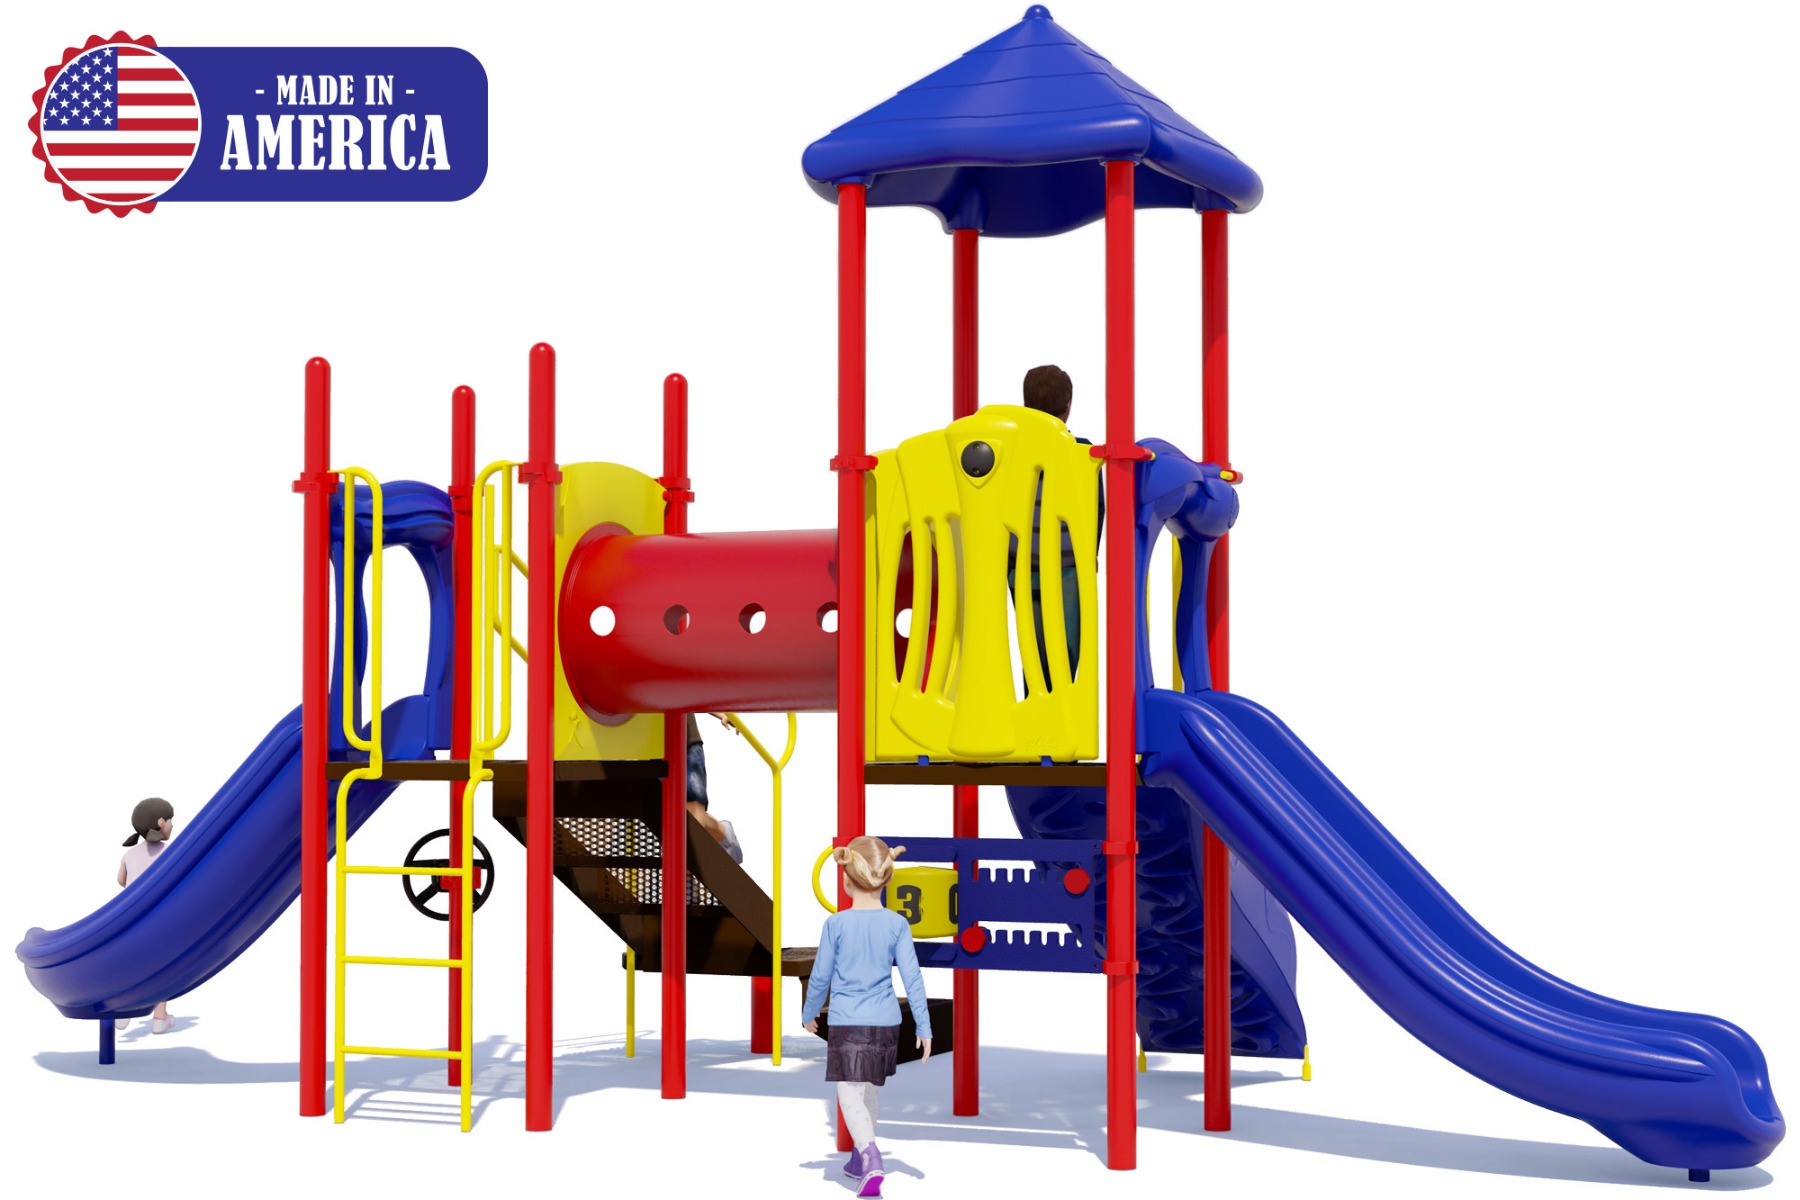 Monkey in the Center - Value Boss Made in USA Playgrounds - Front